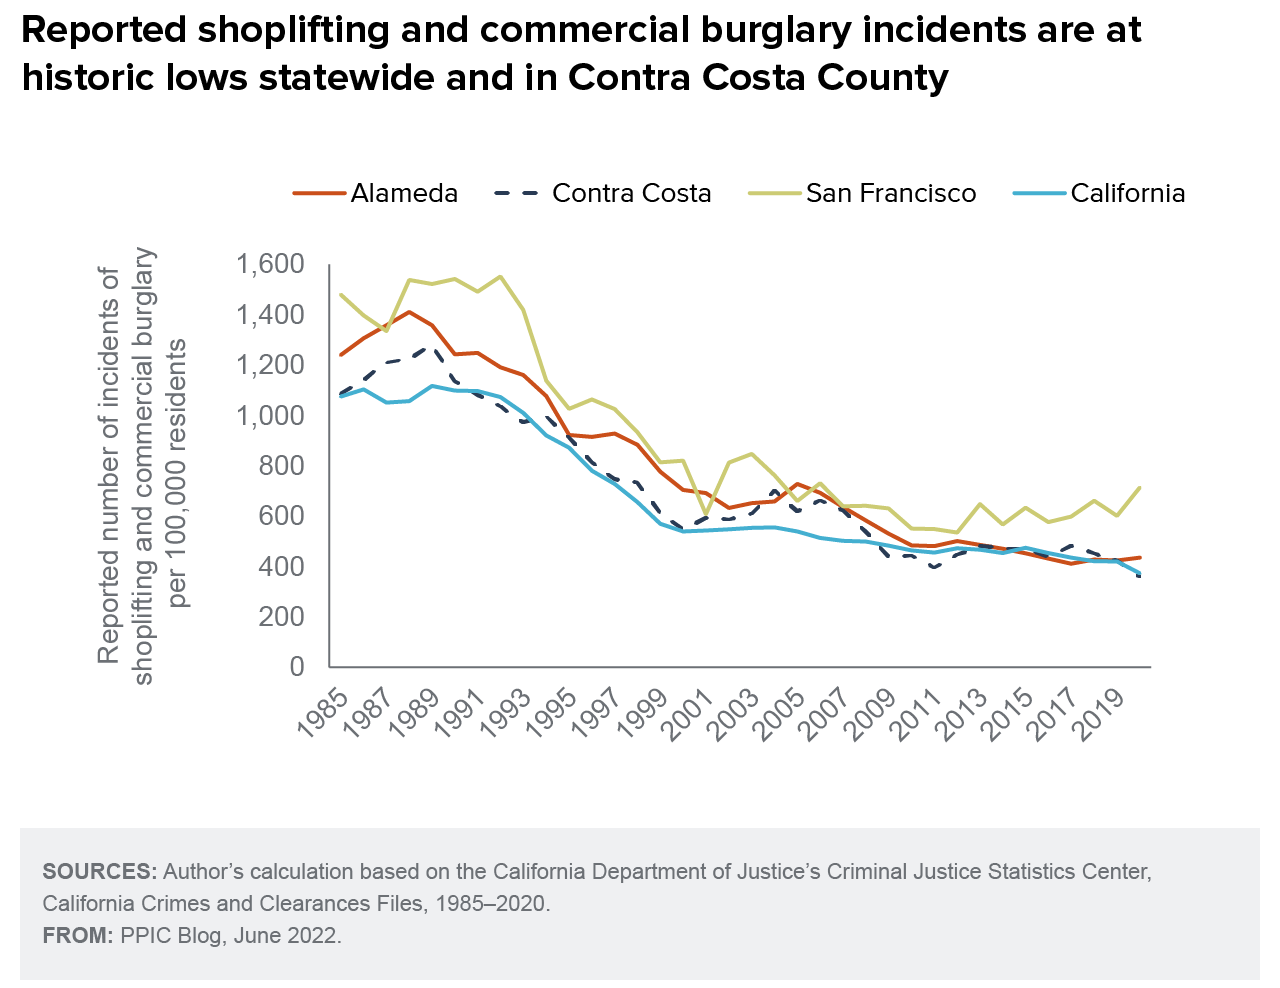 figure - Reported shoplifting and commercial burglary incidents are at historic lows statewide and in Contra Costa County